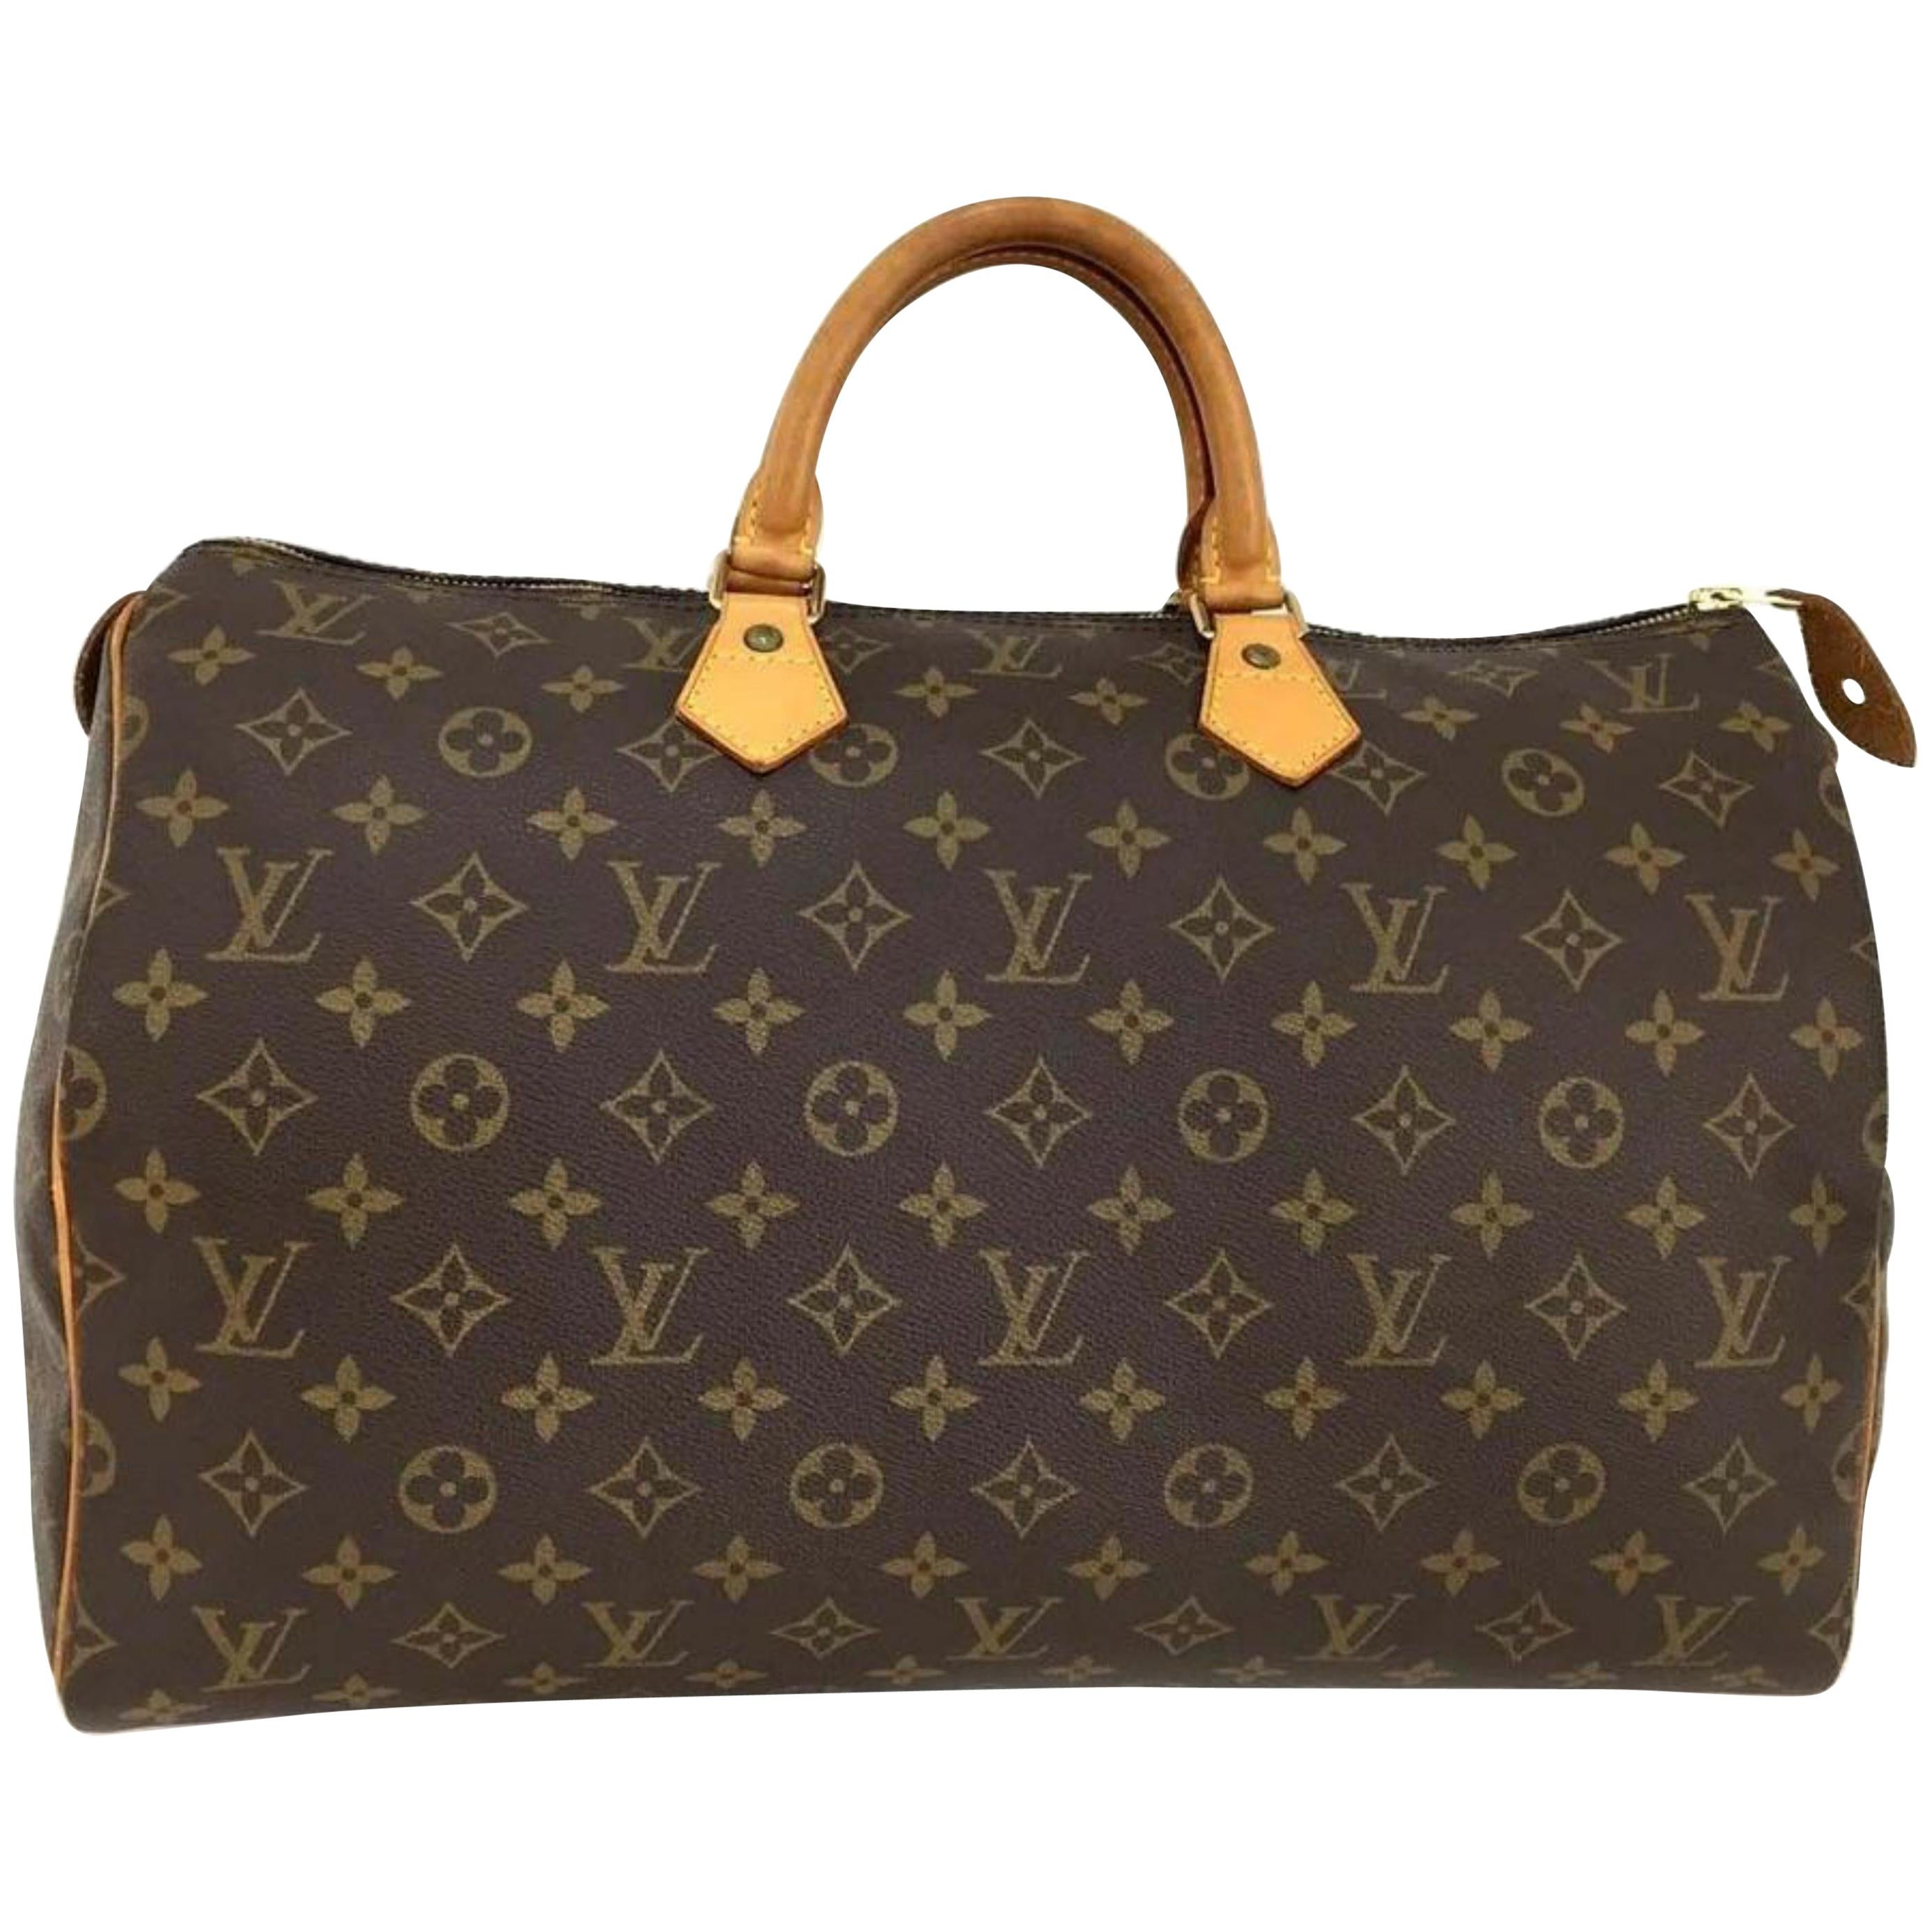 Louis Vuitton Speedy 40 Boston Gm 870010 Brown Coated Canvas Weekend/Travel Bag For Sale